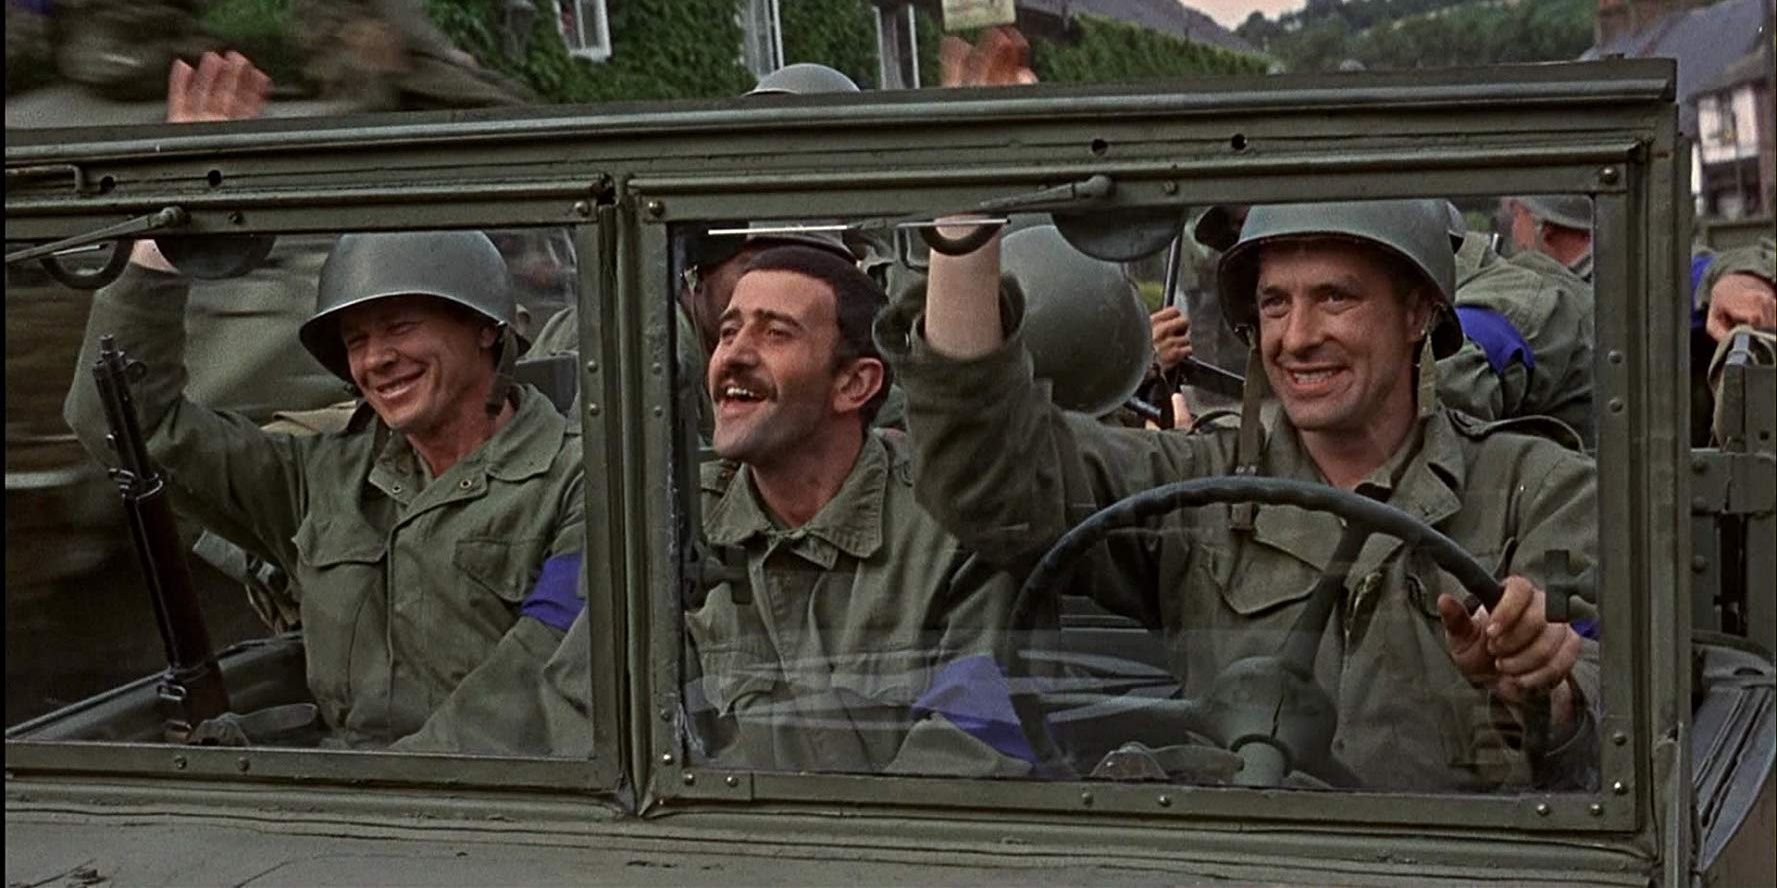 Charles Bronson, John Cassavetes, and Al Mancini in a car in The Dirty Dozen (1967)